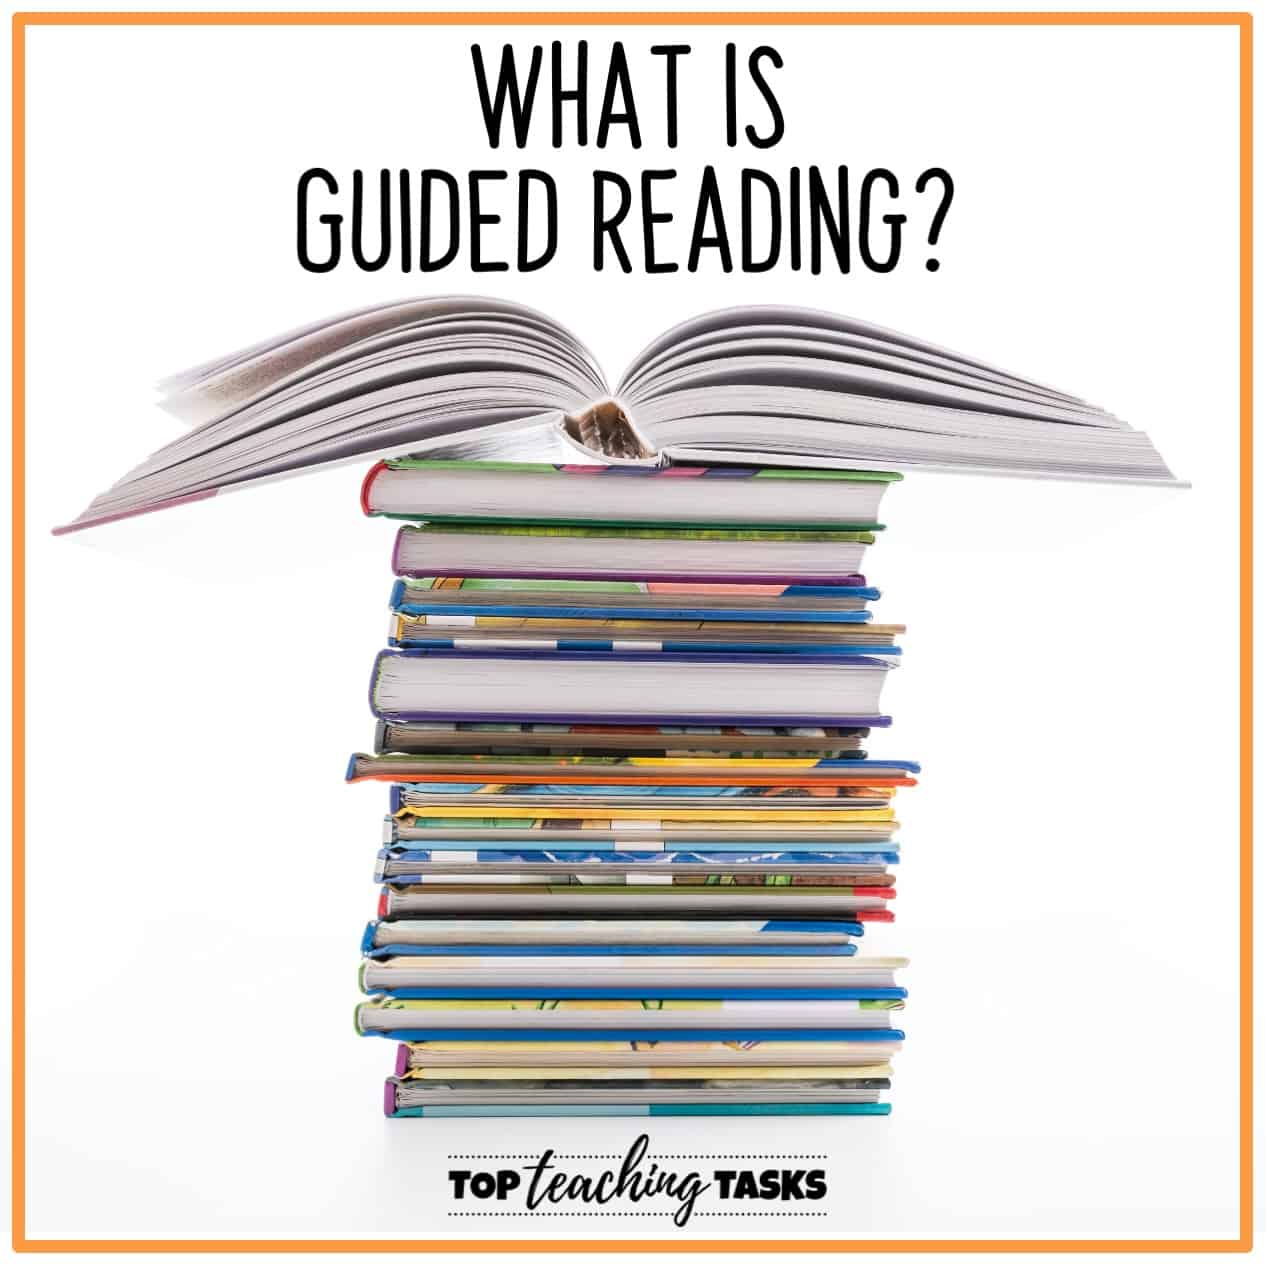 What is Guided Reading? I've previously explained how my reading programme featured four main aspects: Reading to, Shared Reading, Guided Reading and Independent Reading. In this blog post, I am answering the question: What is Guided Reading? I'll also look at some of the research and history behind this approach to building comprehension.